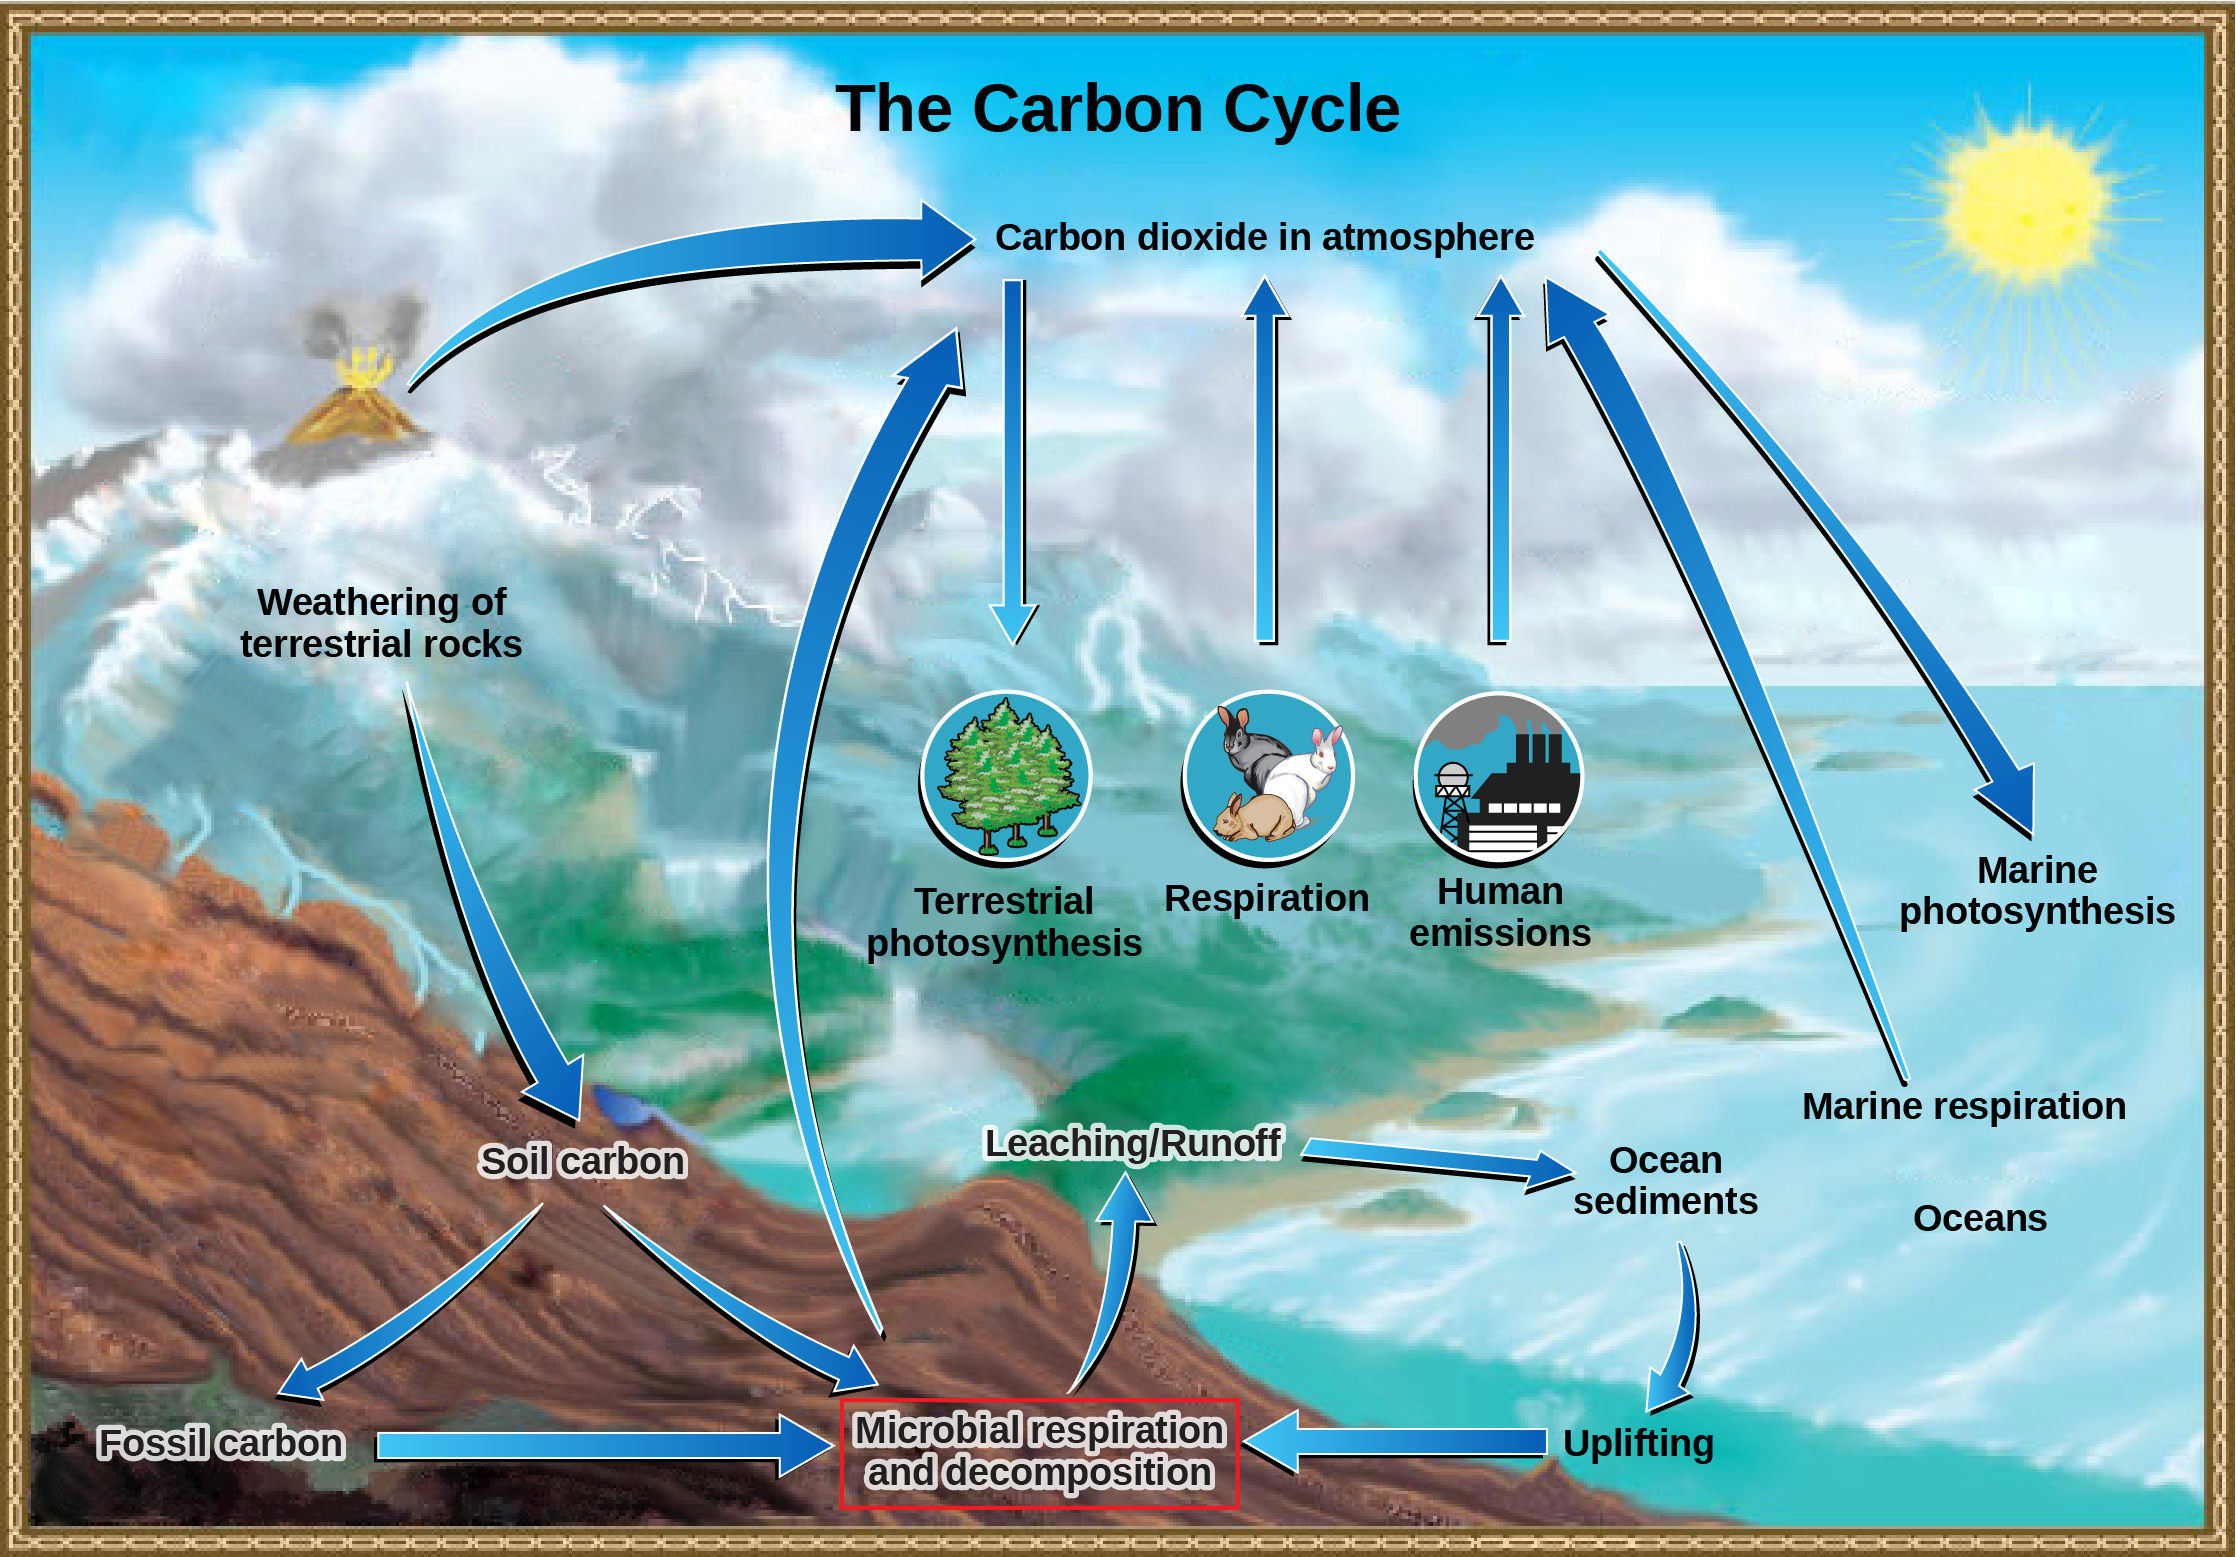 The illustration shows the carbon cycle. Carbon enters the atmosphere as carbon dioxide gas that is released from human emissions, respiration and decomposition, and volcanic emissions. Carbon dioxide is removed from the atmosphere by marine and terrestrial photosynthesis. Carbon from the weathering of rocks becomes soil carbon, which over time can become fossil carbon. Carbon enters the ocean from land via leaching and runoff. Uplifting of ocean sediments can return carbon to land.